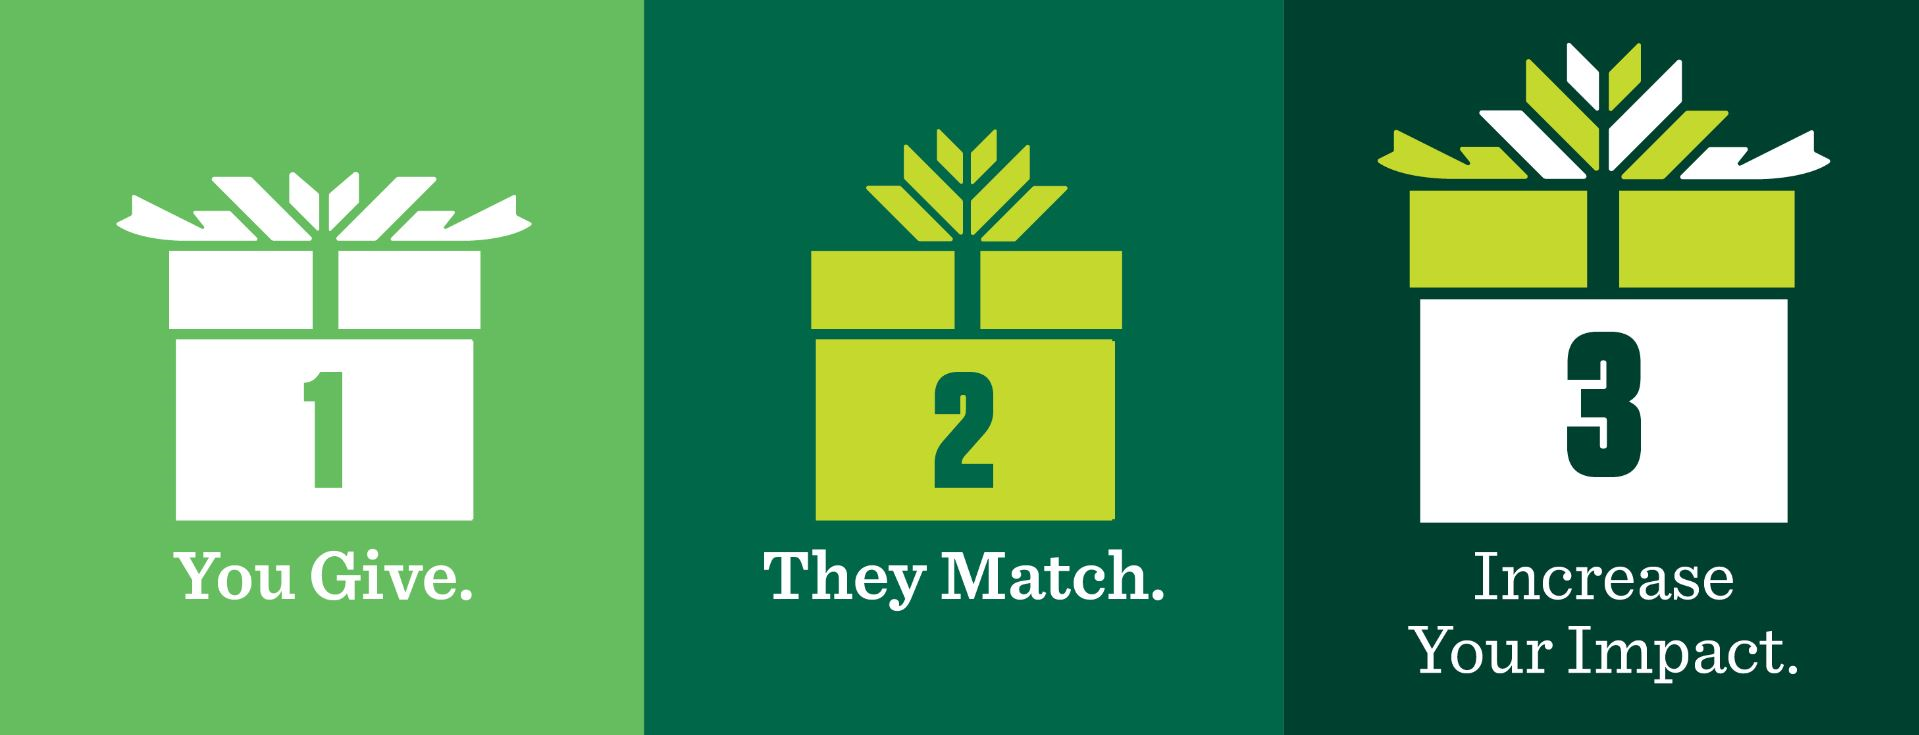 matching gifts increases donor impact